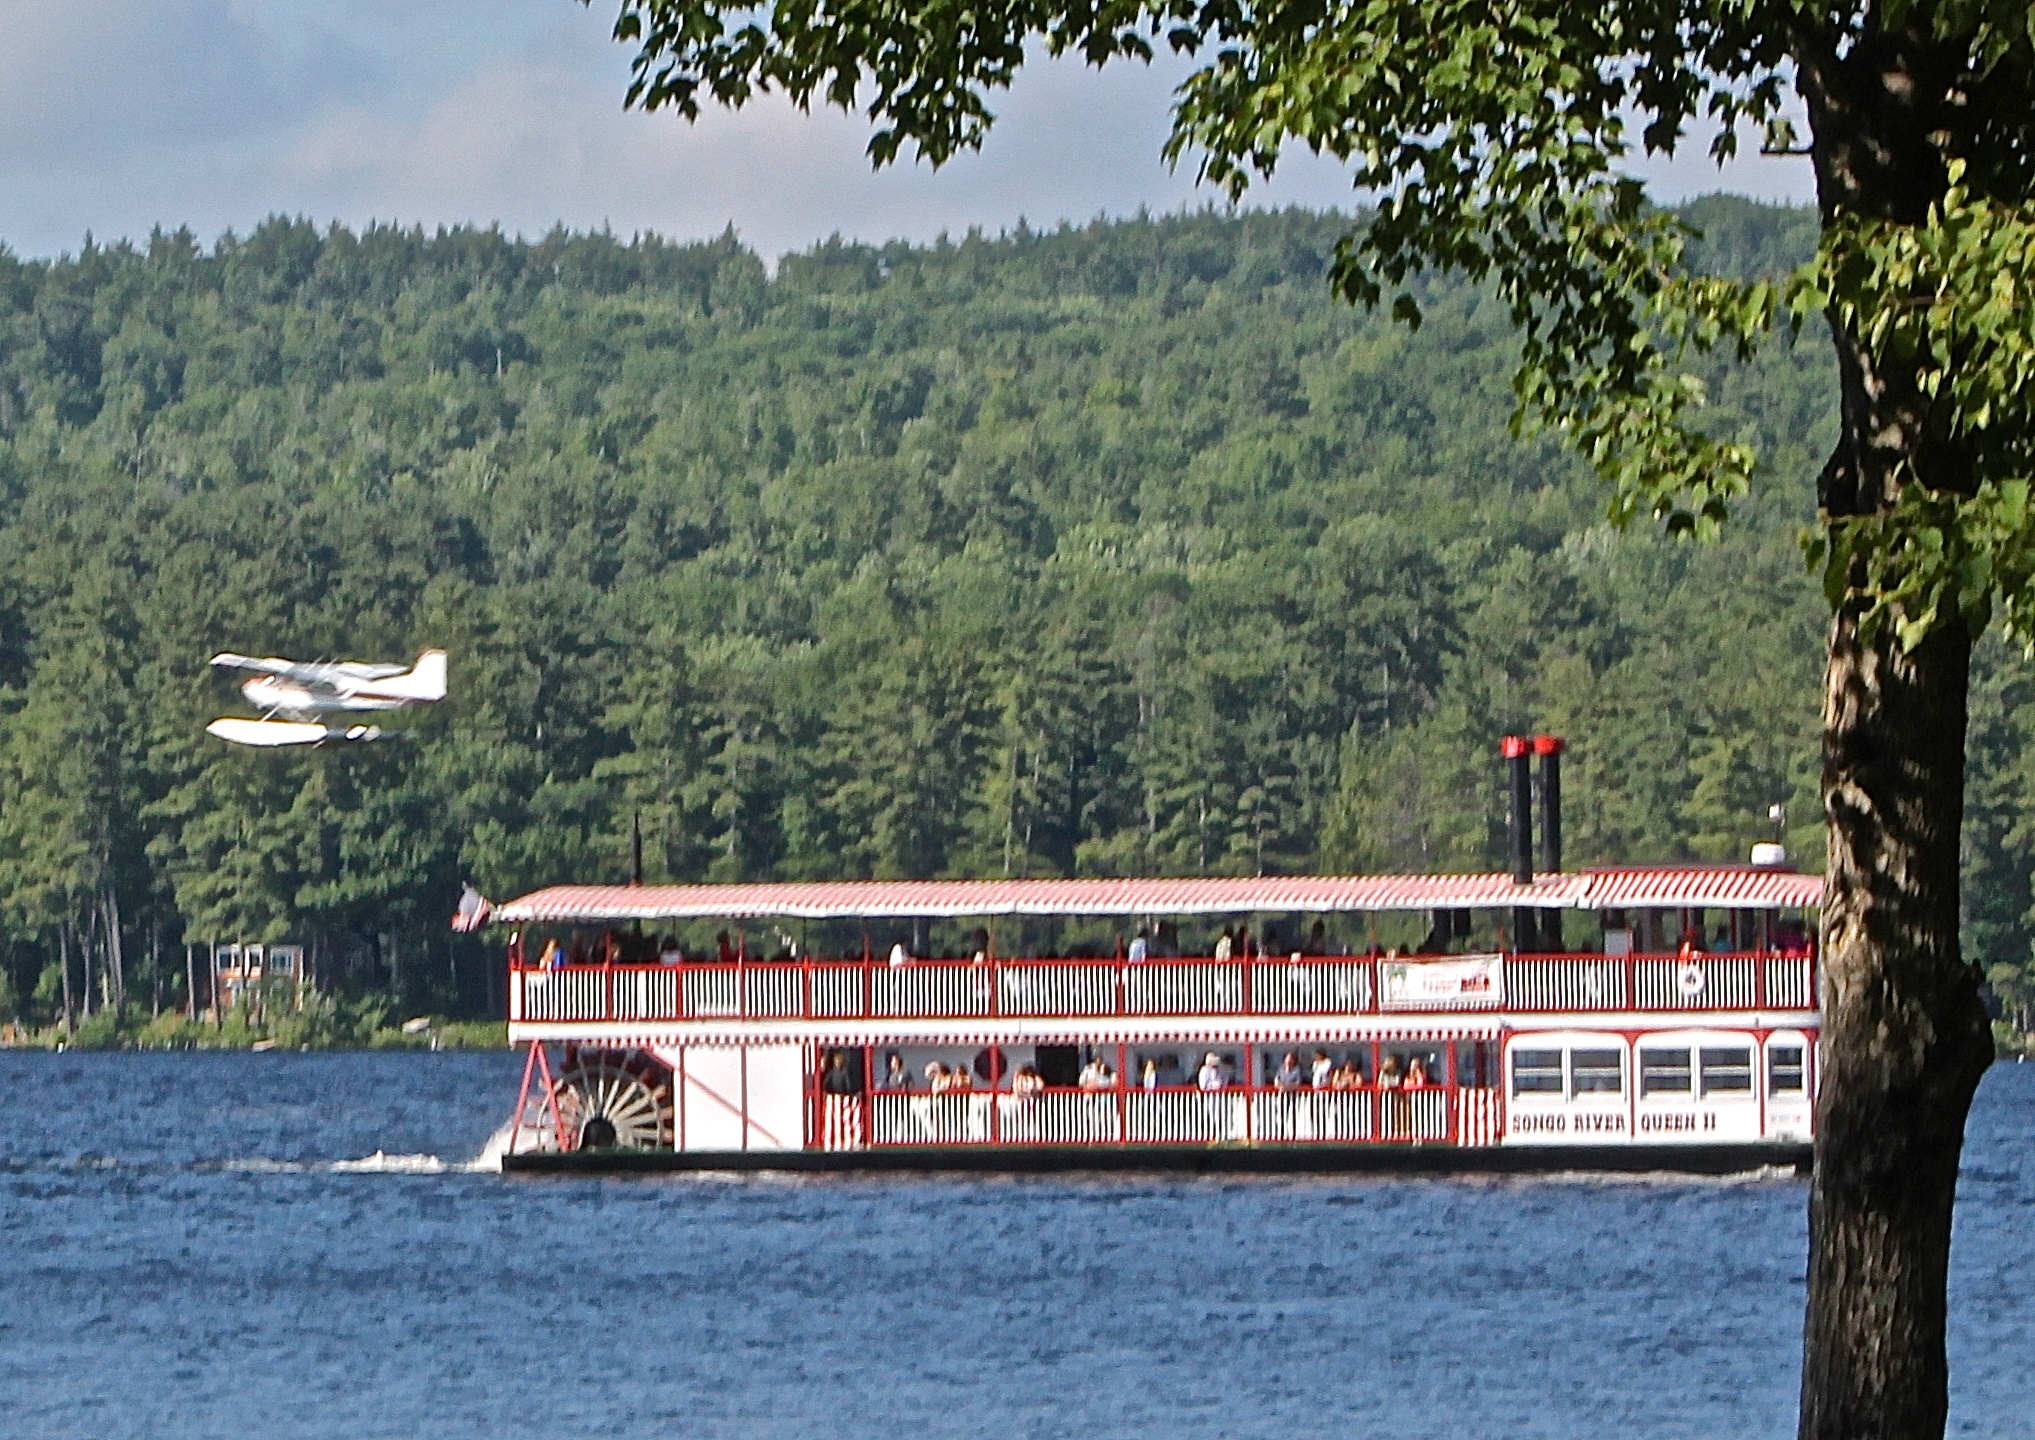 Songo River Queen II And The Naples Air Seaplane